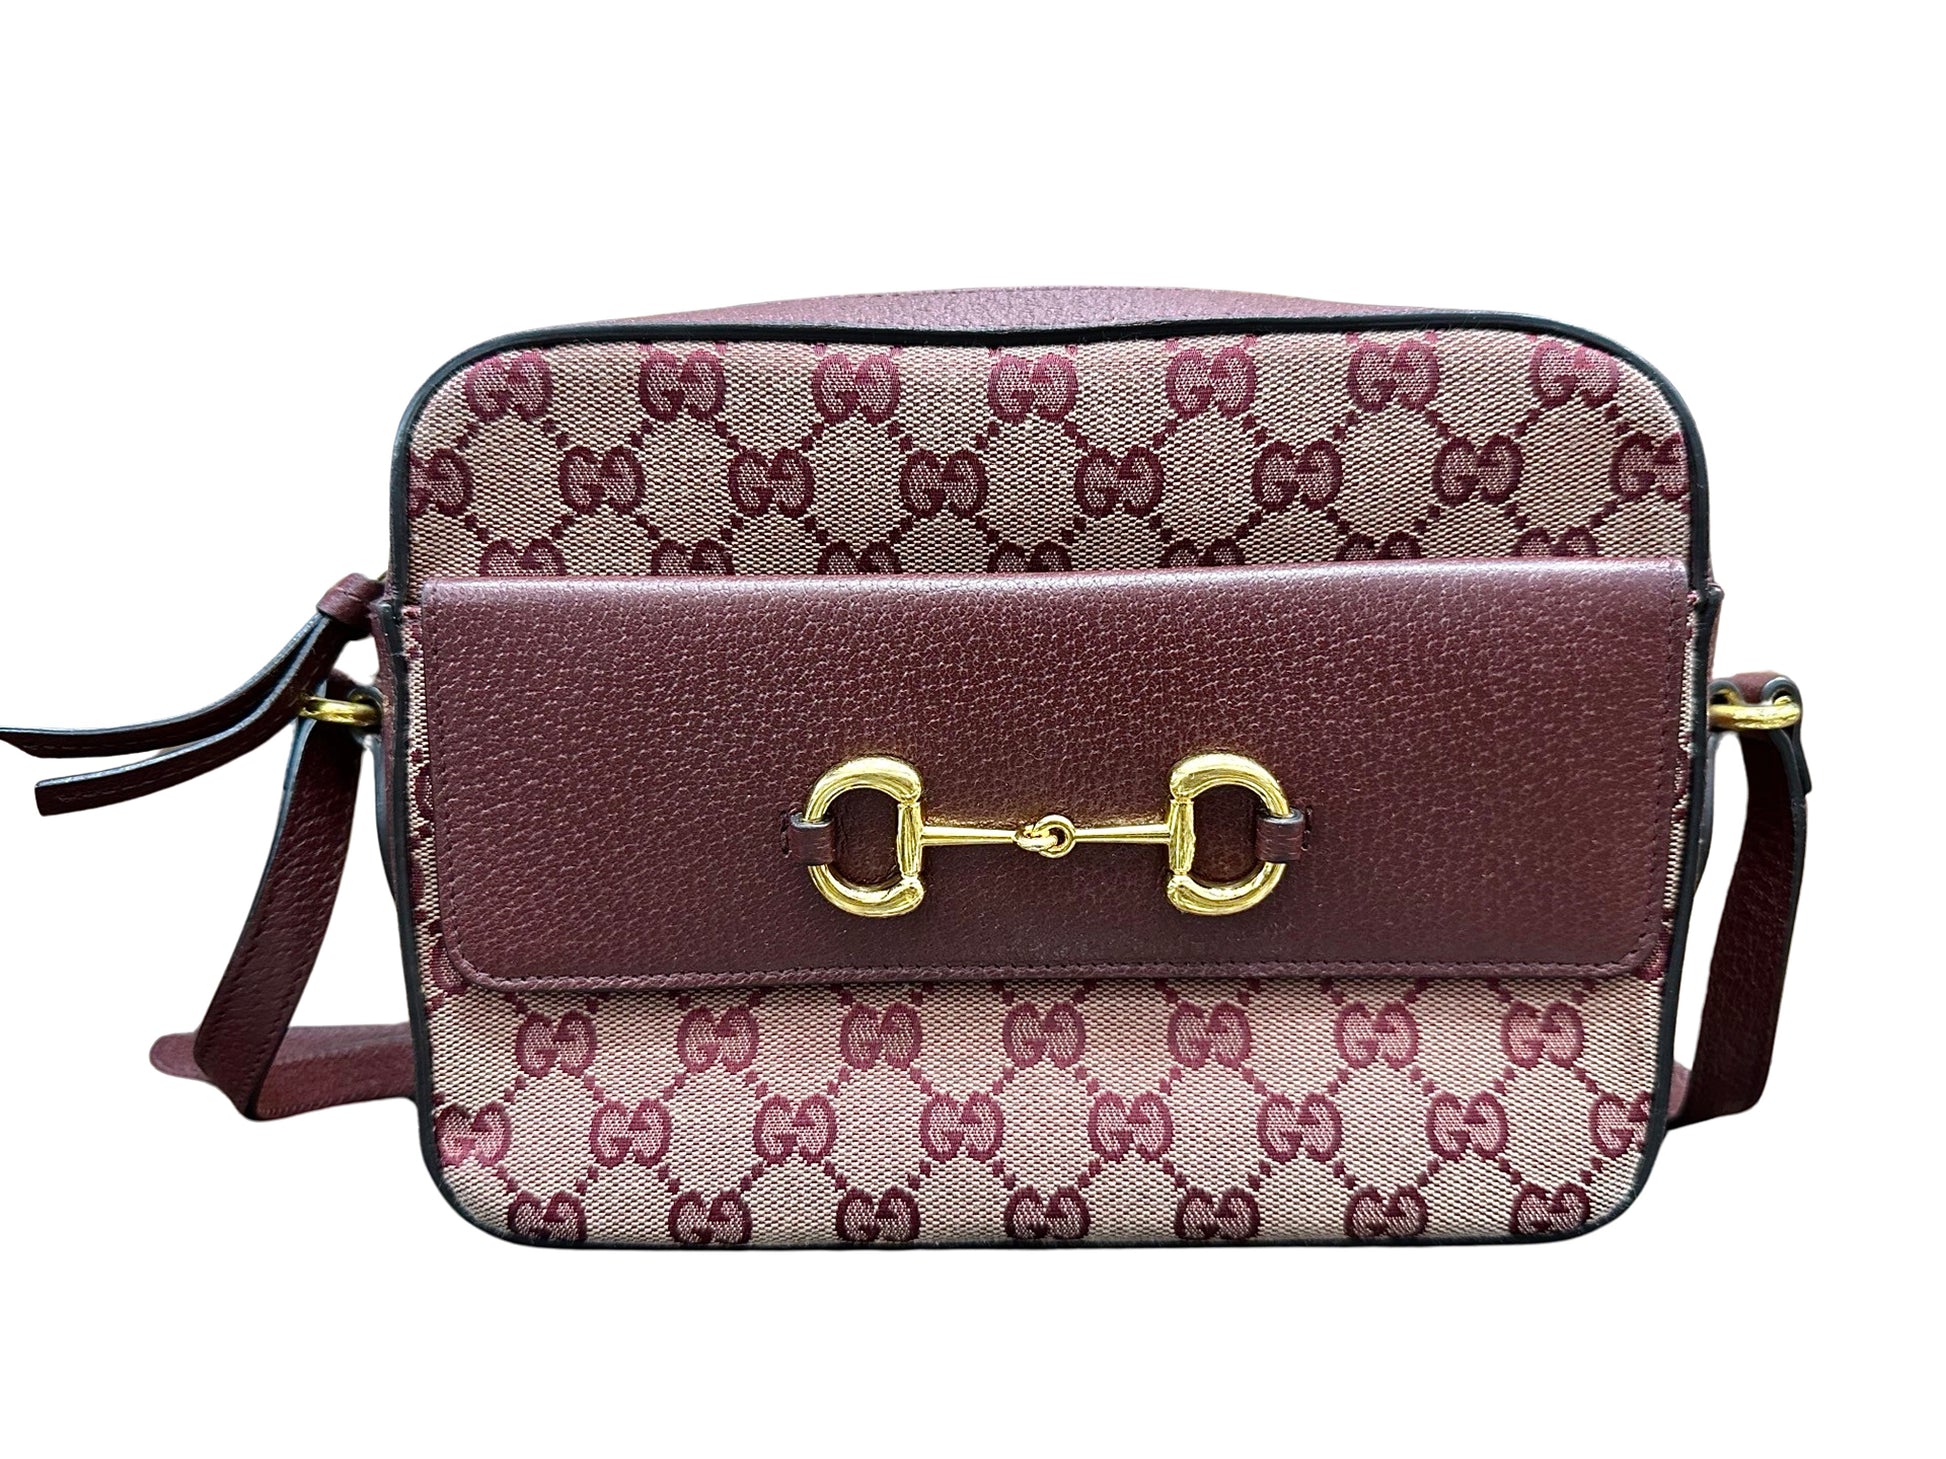 Front of burgundy Gucci